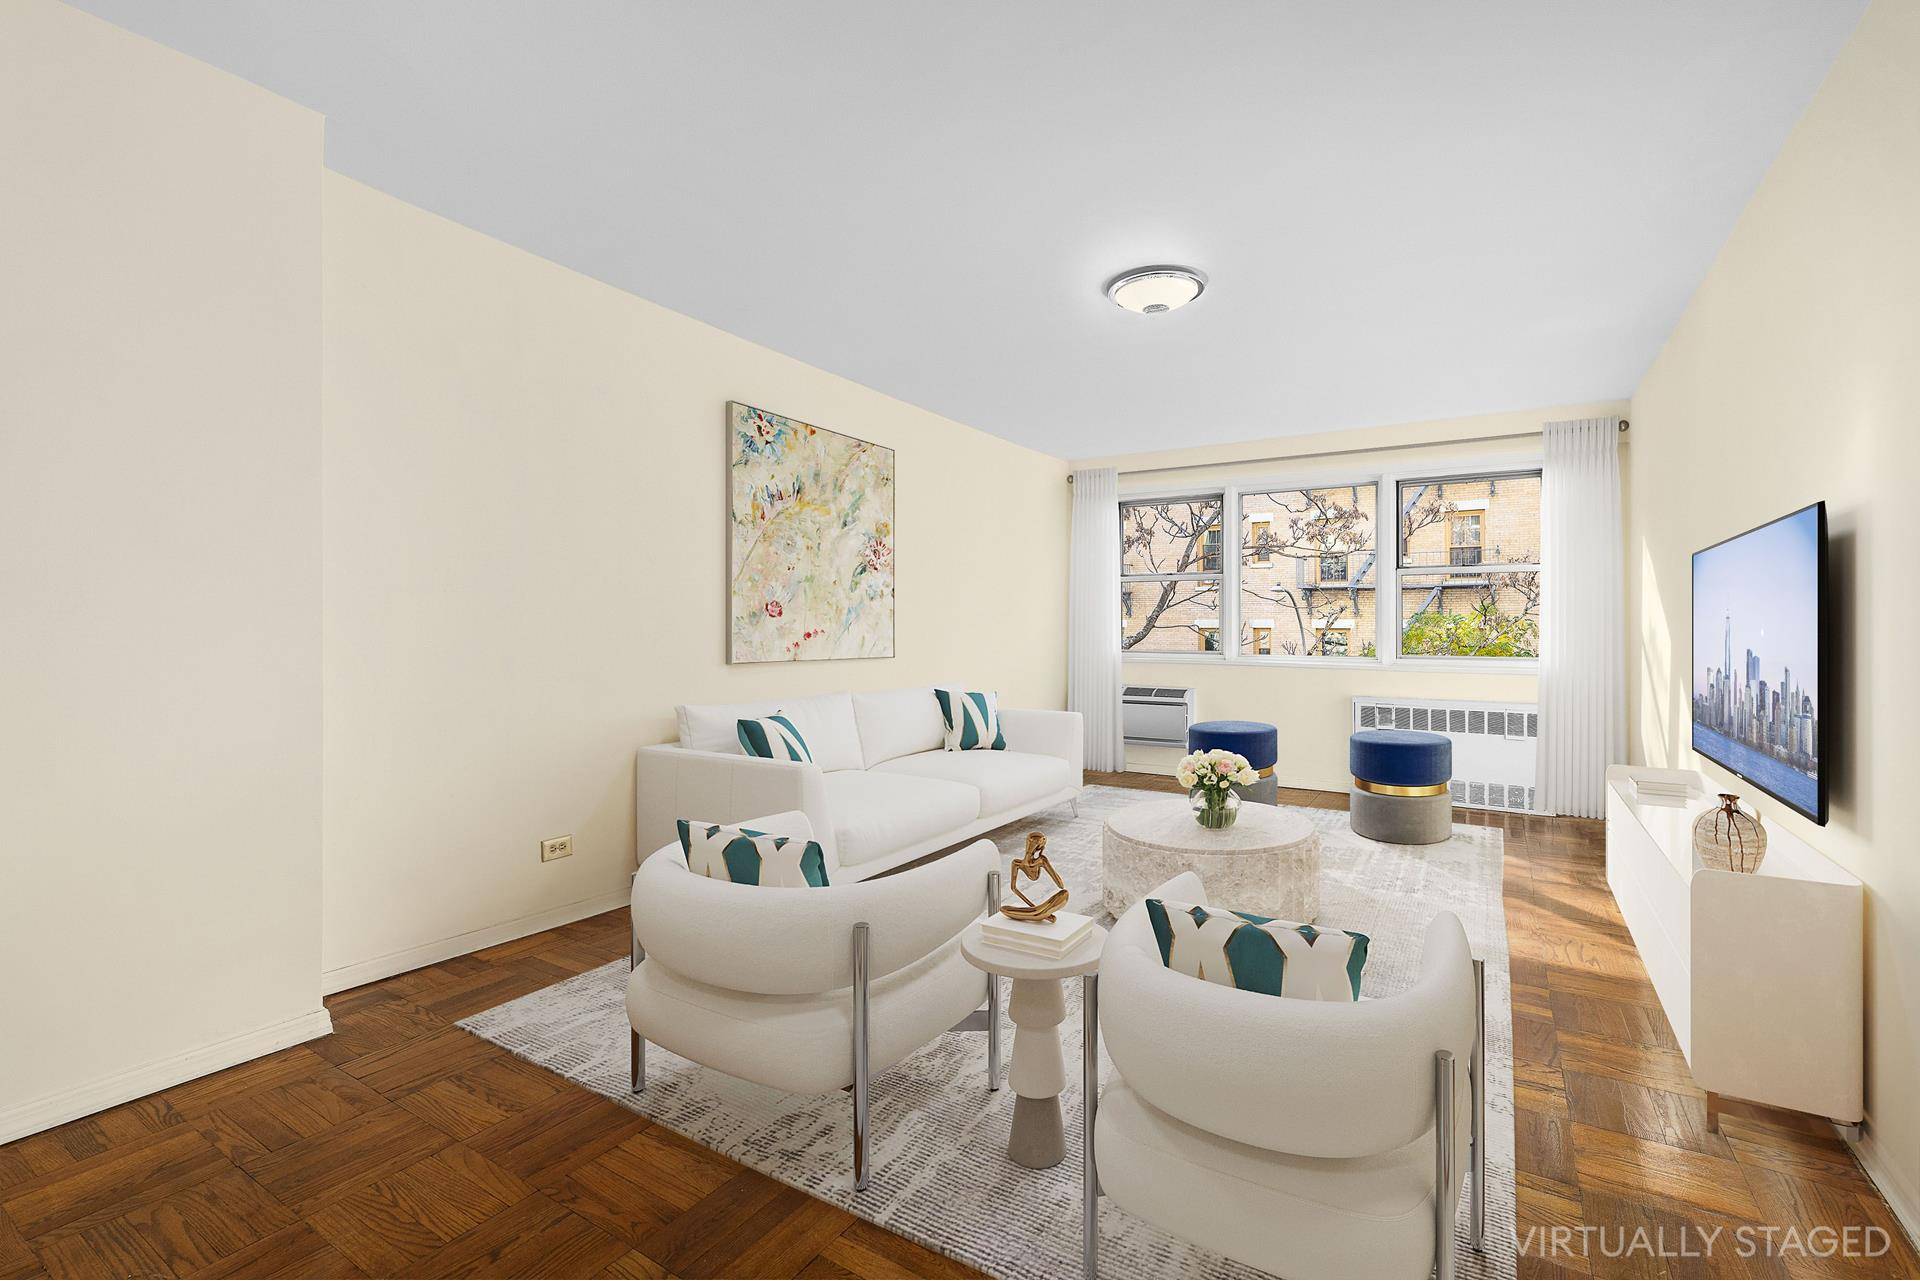 Charming 1 Bedroom in lovely Full Service Condo on quiet Upper East Side street steps from Rockefeller University, Sunny southern exposure with treelined view.